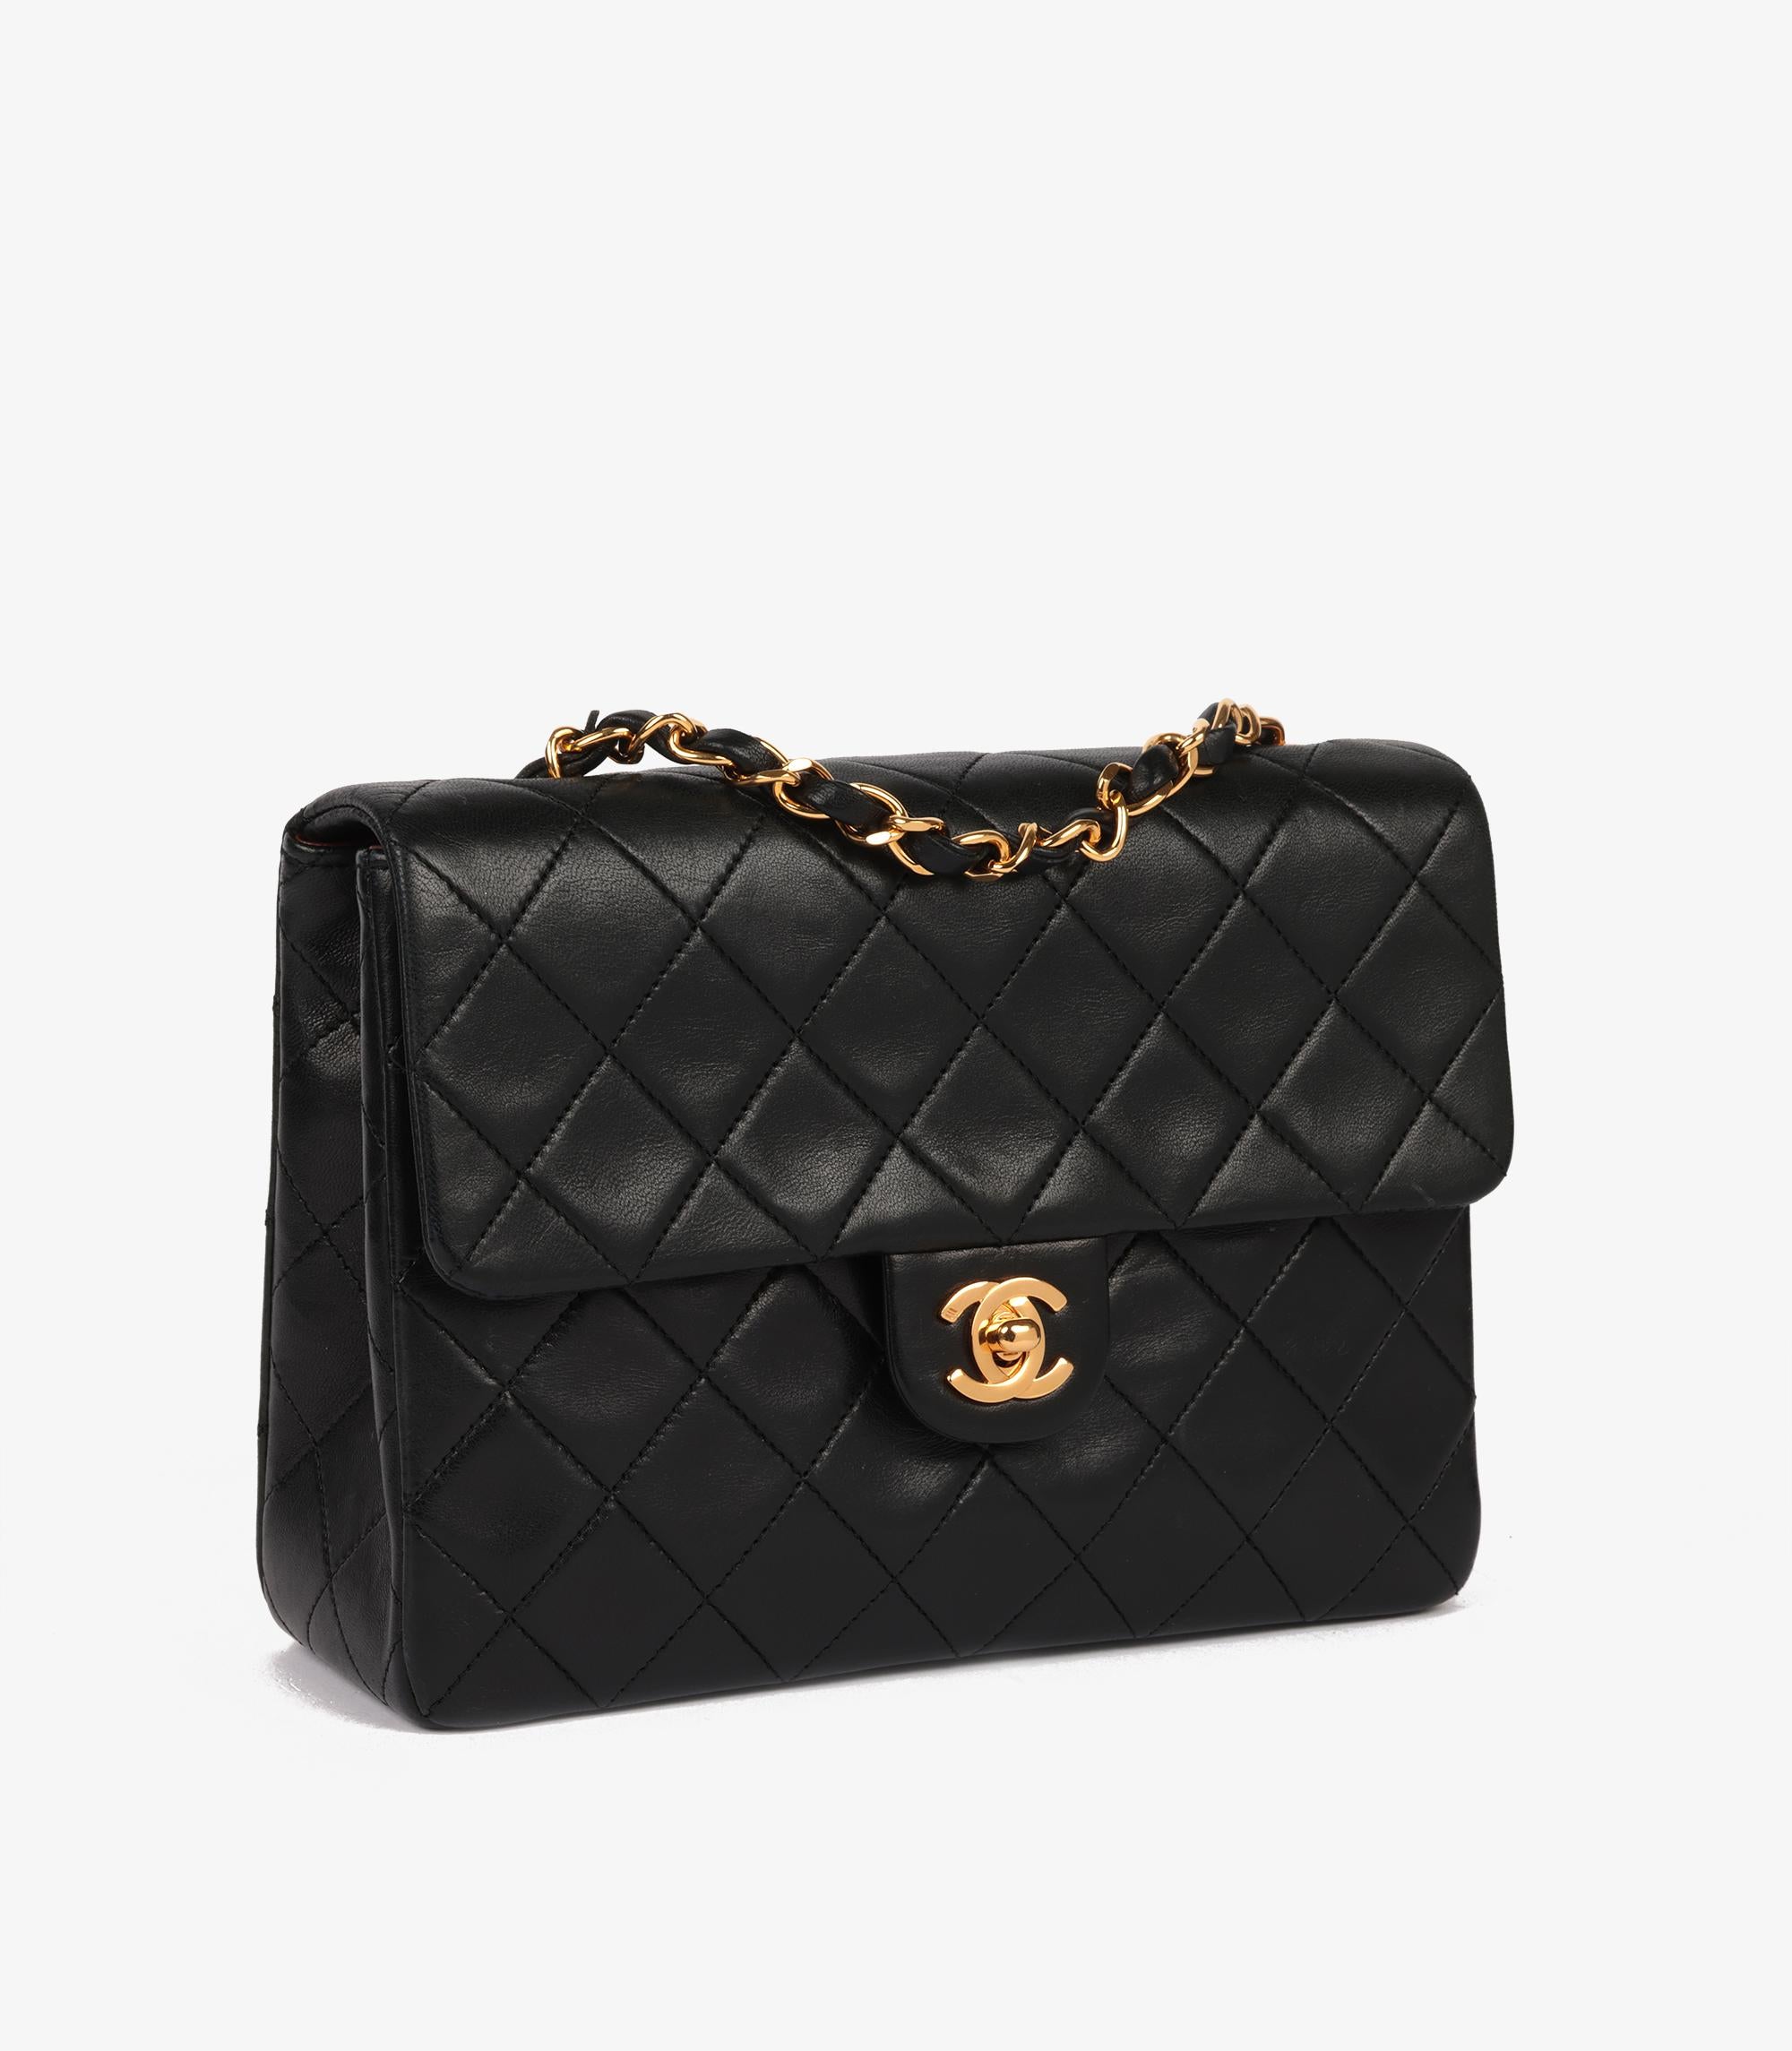 Chanel Black Quilted Lambskin Vintage Square Mini Flap Bag

Brand- Chanel
Model- Square Mini Flap Bag
Product Type- Crossbody, Shoulder
Serial Number- 4700377
Age- Circa 1996
Accompanied By- Chanel Dust Bag, Authenticity Card
Colour- Black
Hardware-